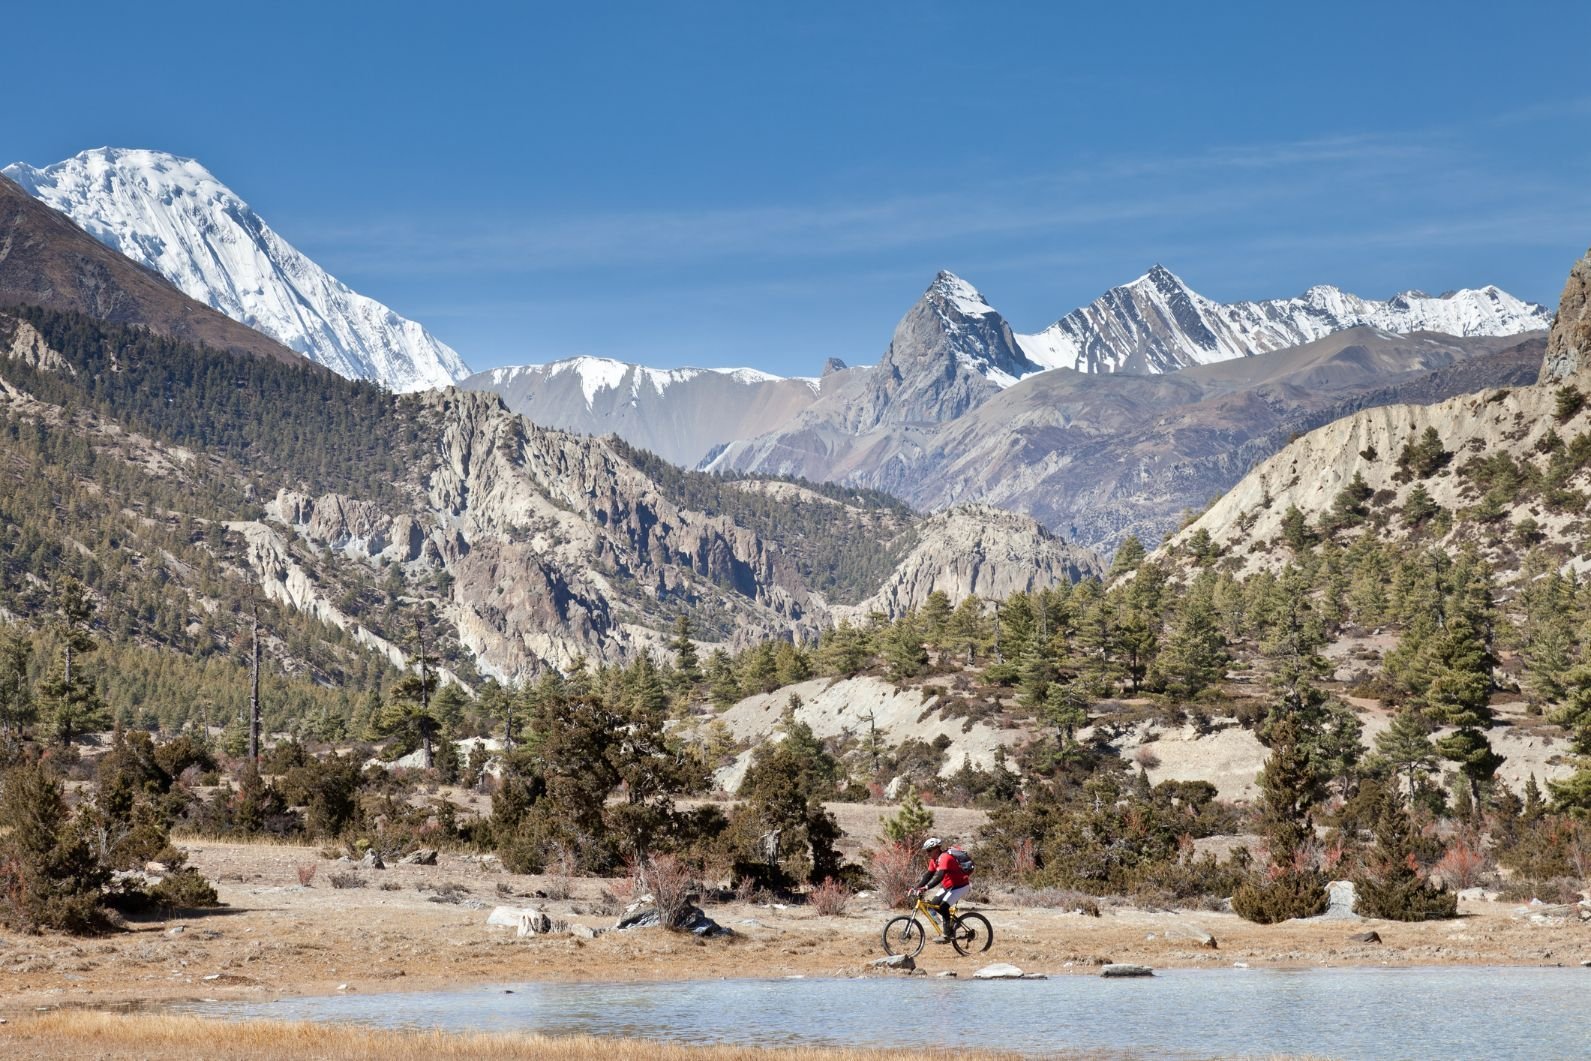 Riding in the Annapurna Conservation Area, near Manang. In the background, the icecaped summit of Tilicho Peak (7,134m). Photo: Getty